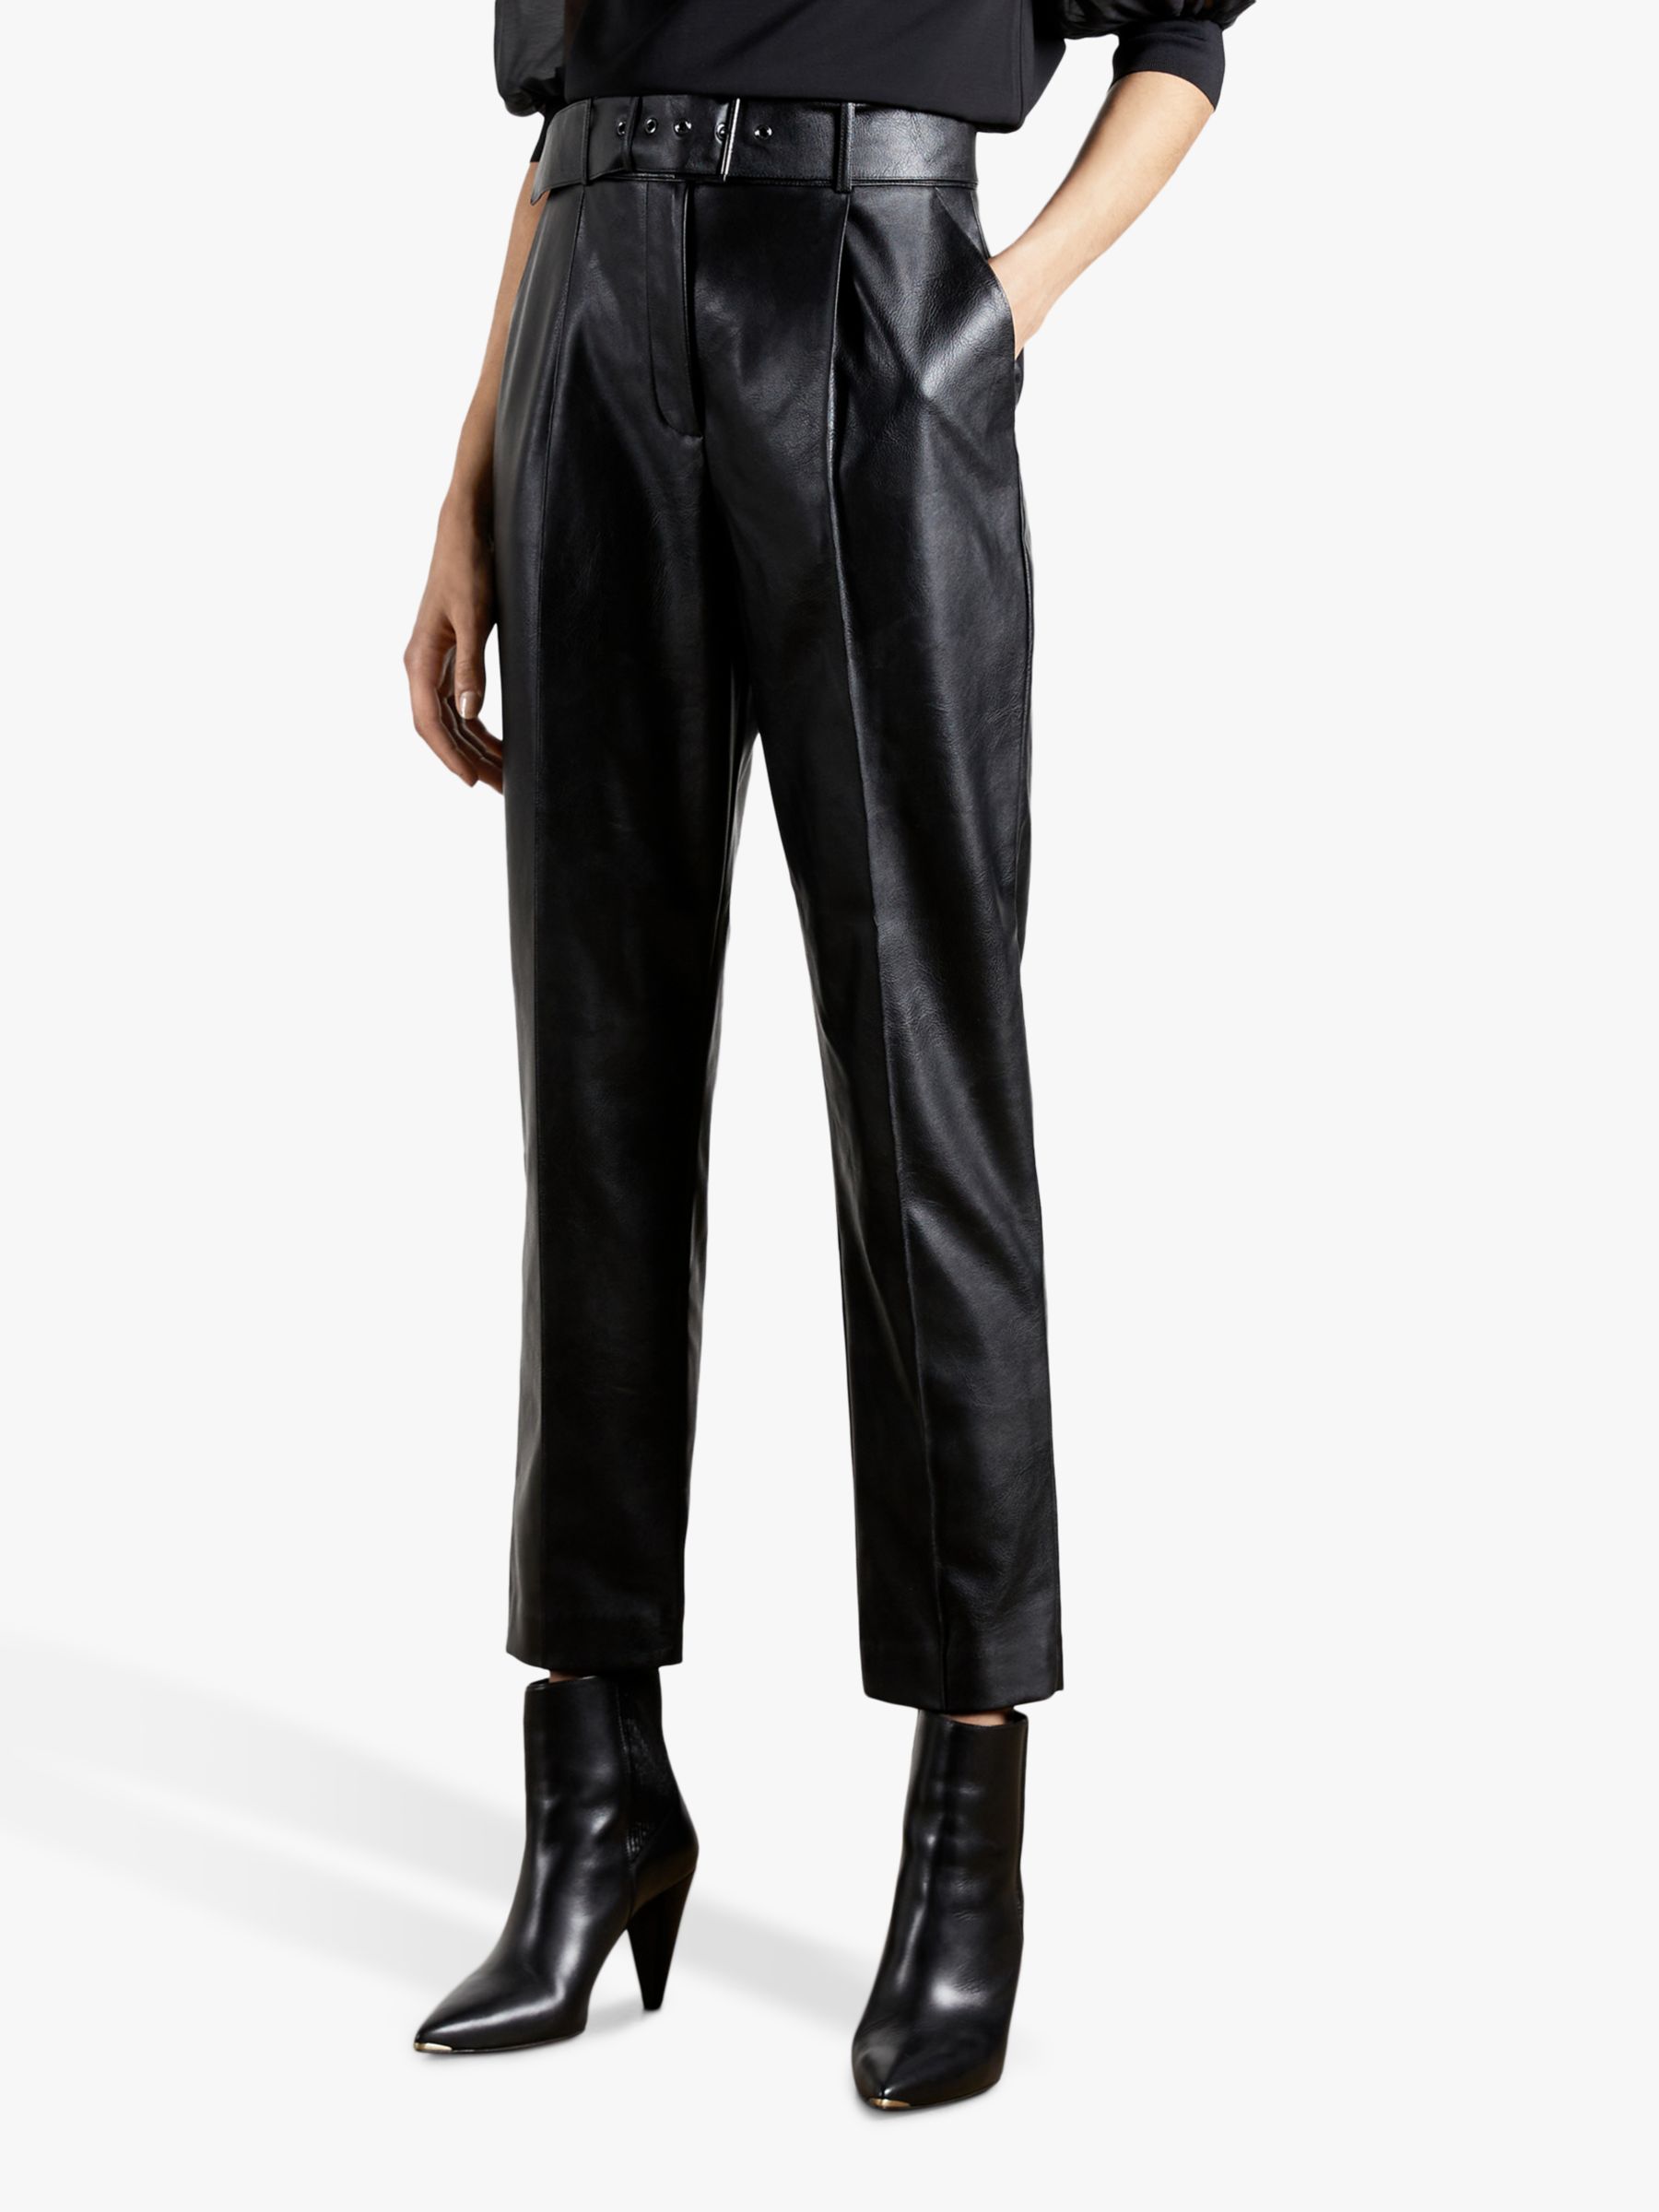 Ted Baker Faydell Faux Leather Trousers, Black at John Lewis & Partners